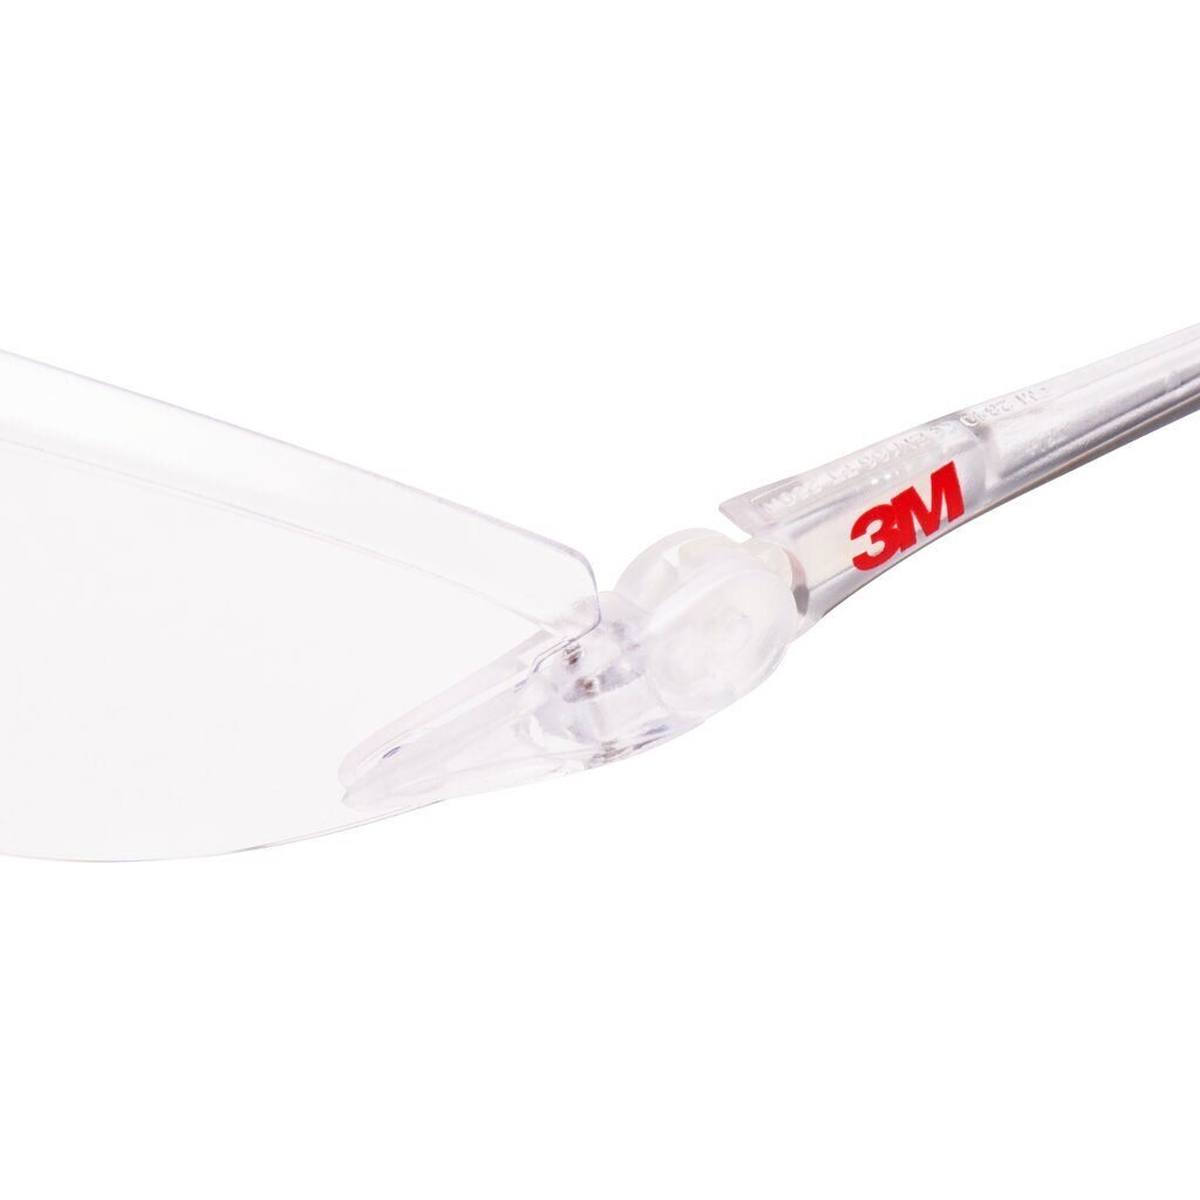 3M 2840 Safety spectacles AS/AF/UV, PC, clear, adjustable temple length and tilt, soft temple tips